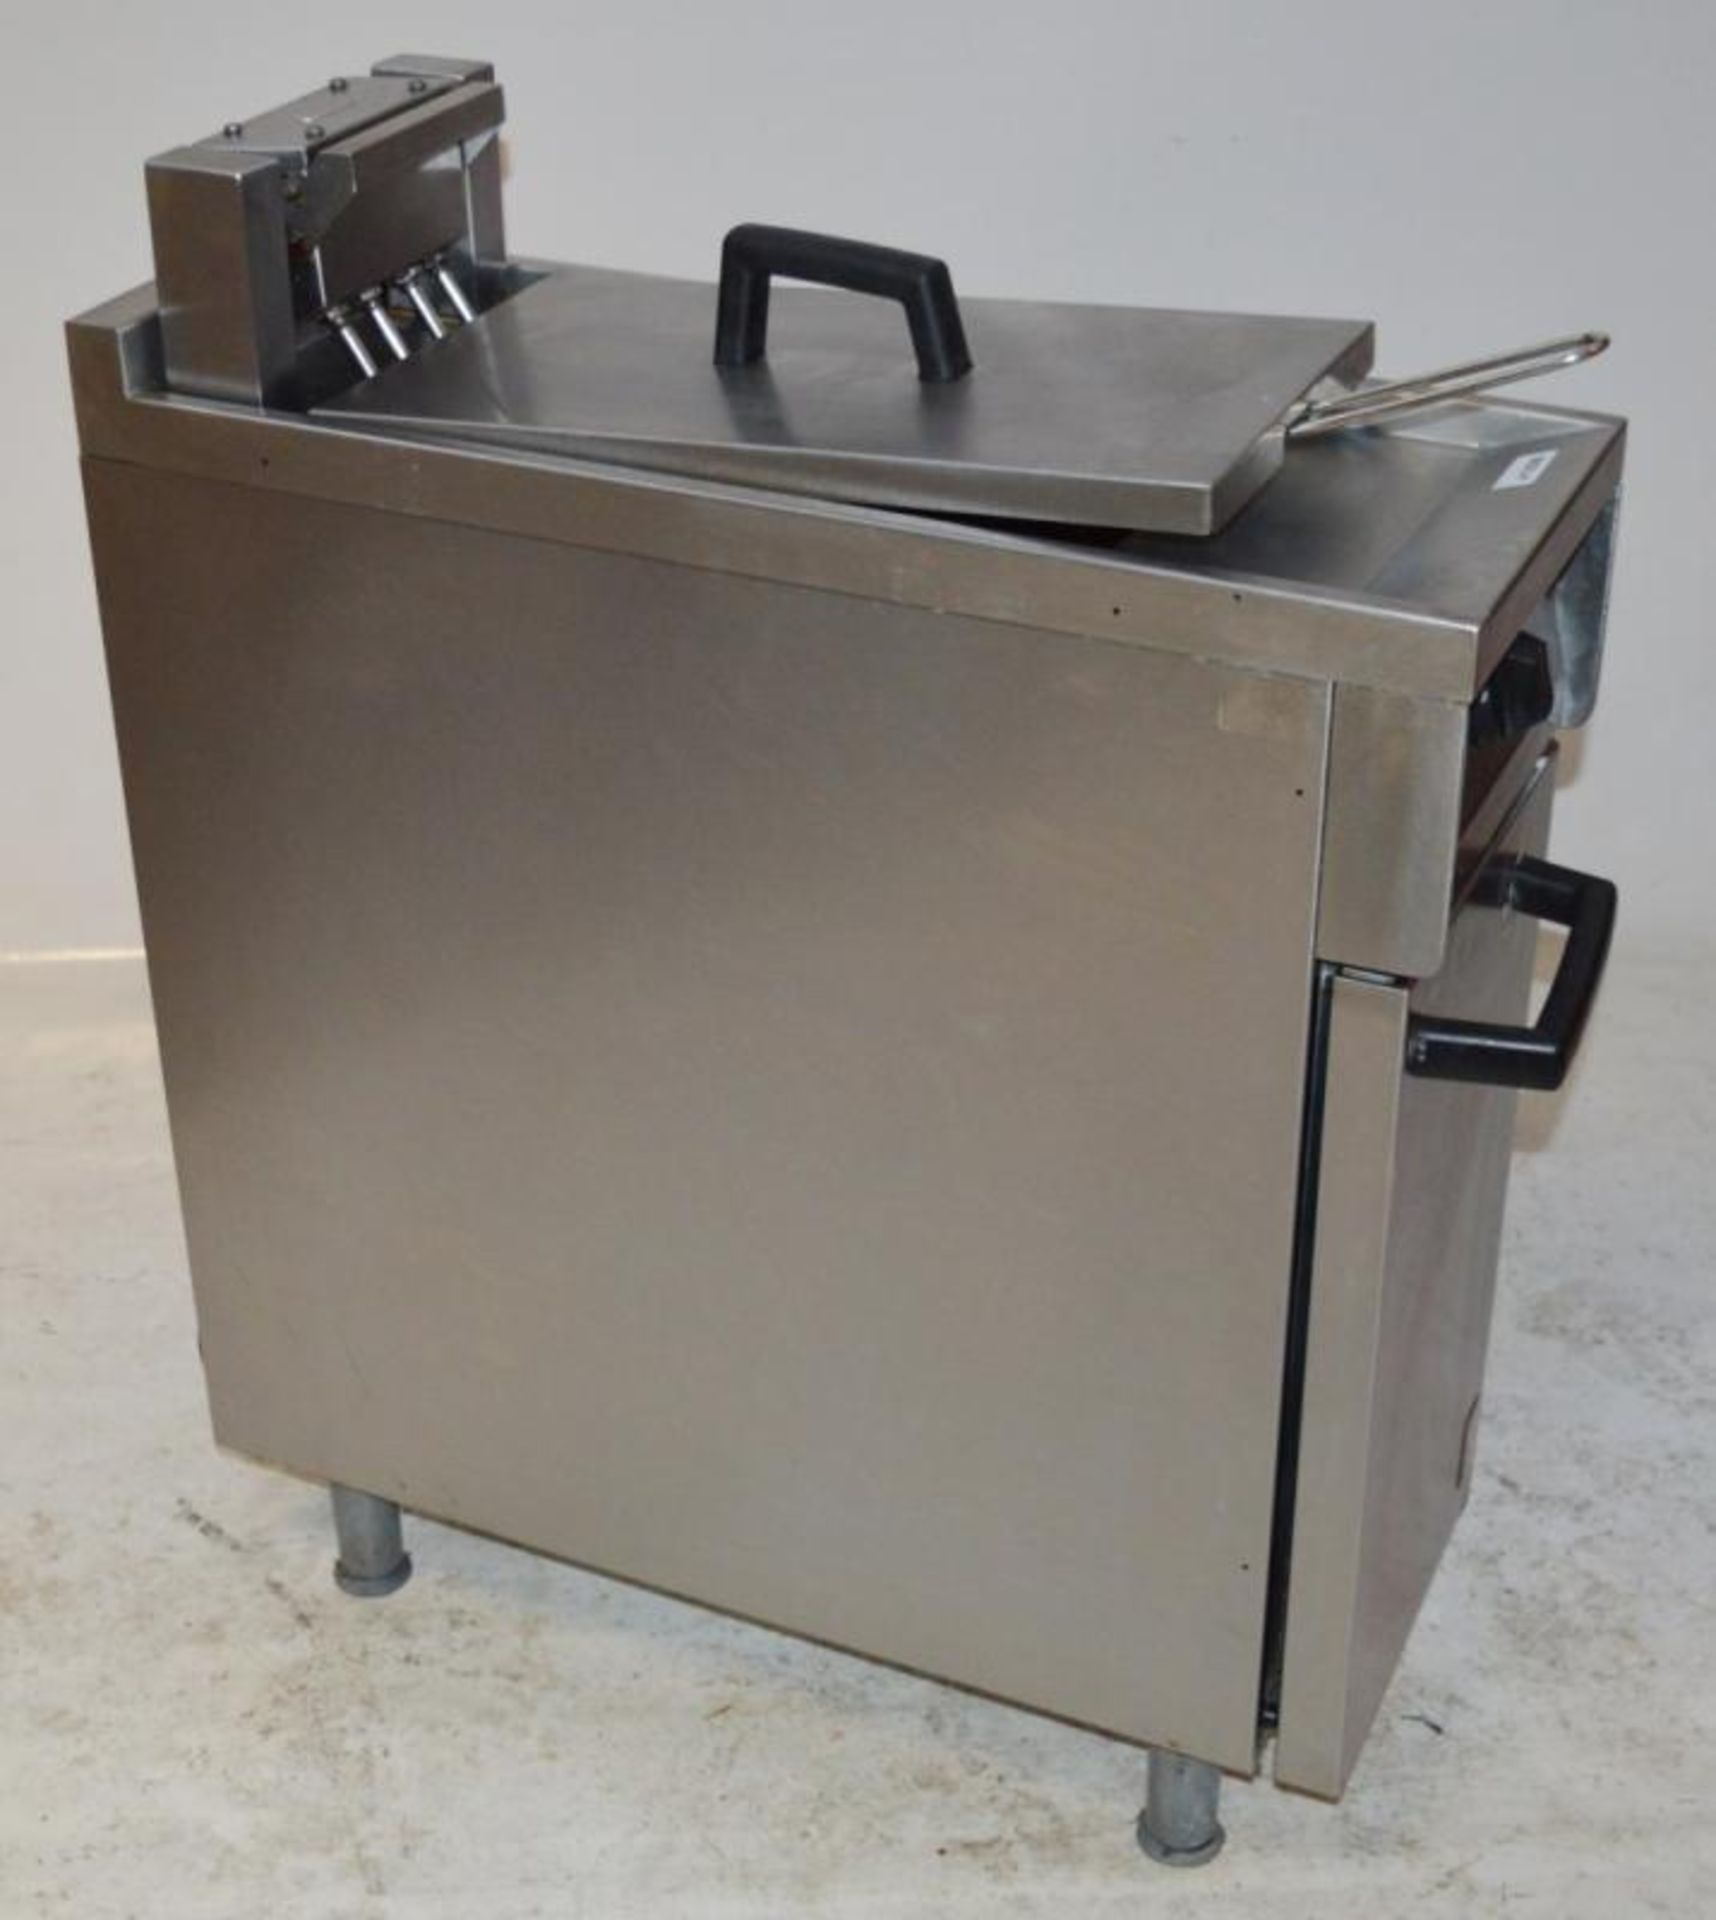 1 x Falcon Dominator E1830 Electric 3 Phase Fryer Cooker - Stainless Steel - H84 x W30 x D77 cms - C - Image 3 of 13